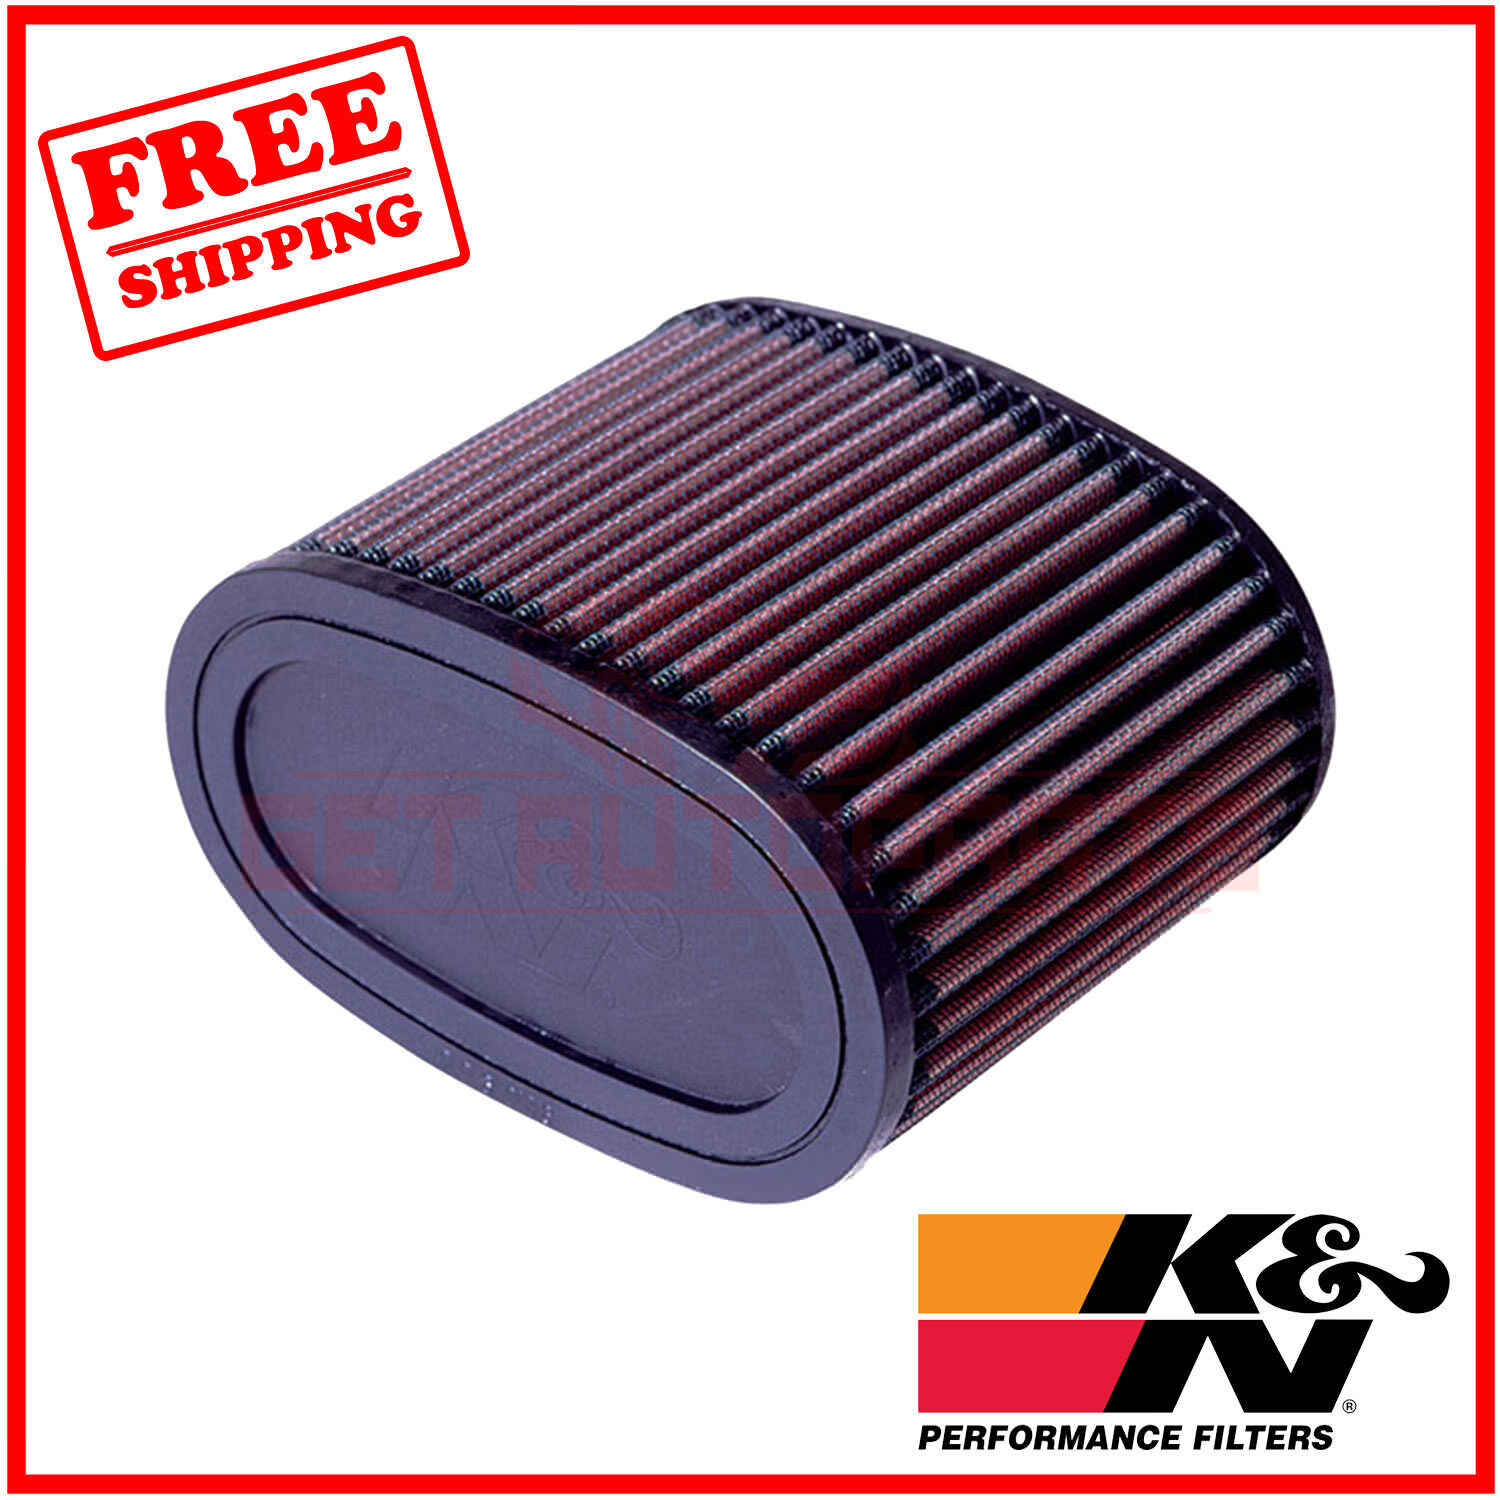 K&N Replacement Air Filter for Honda VT1100C2 Shadow ACE 1995-1999